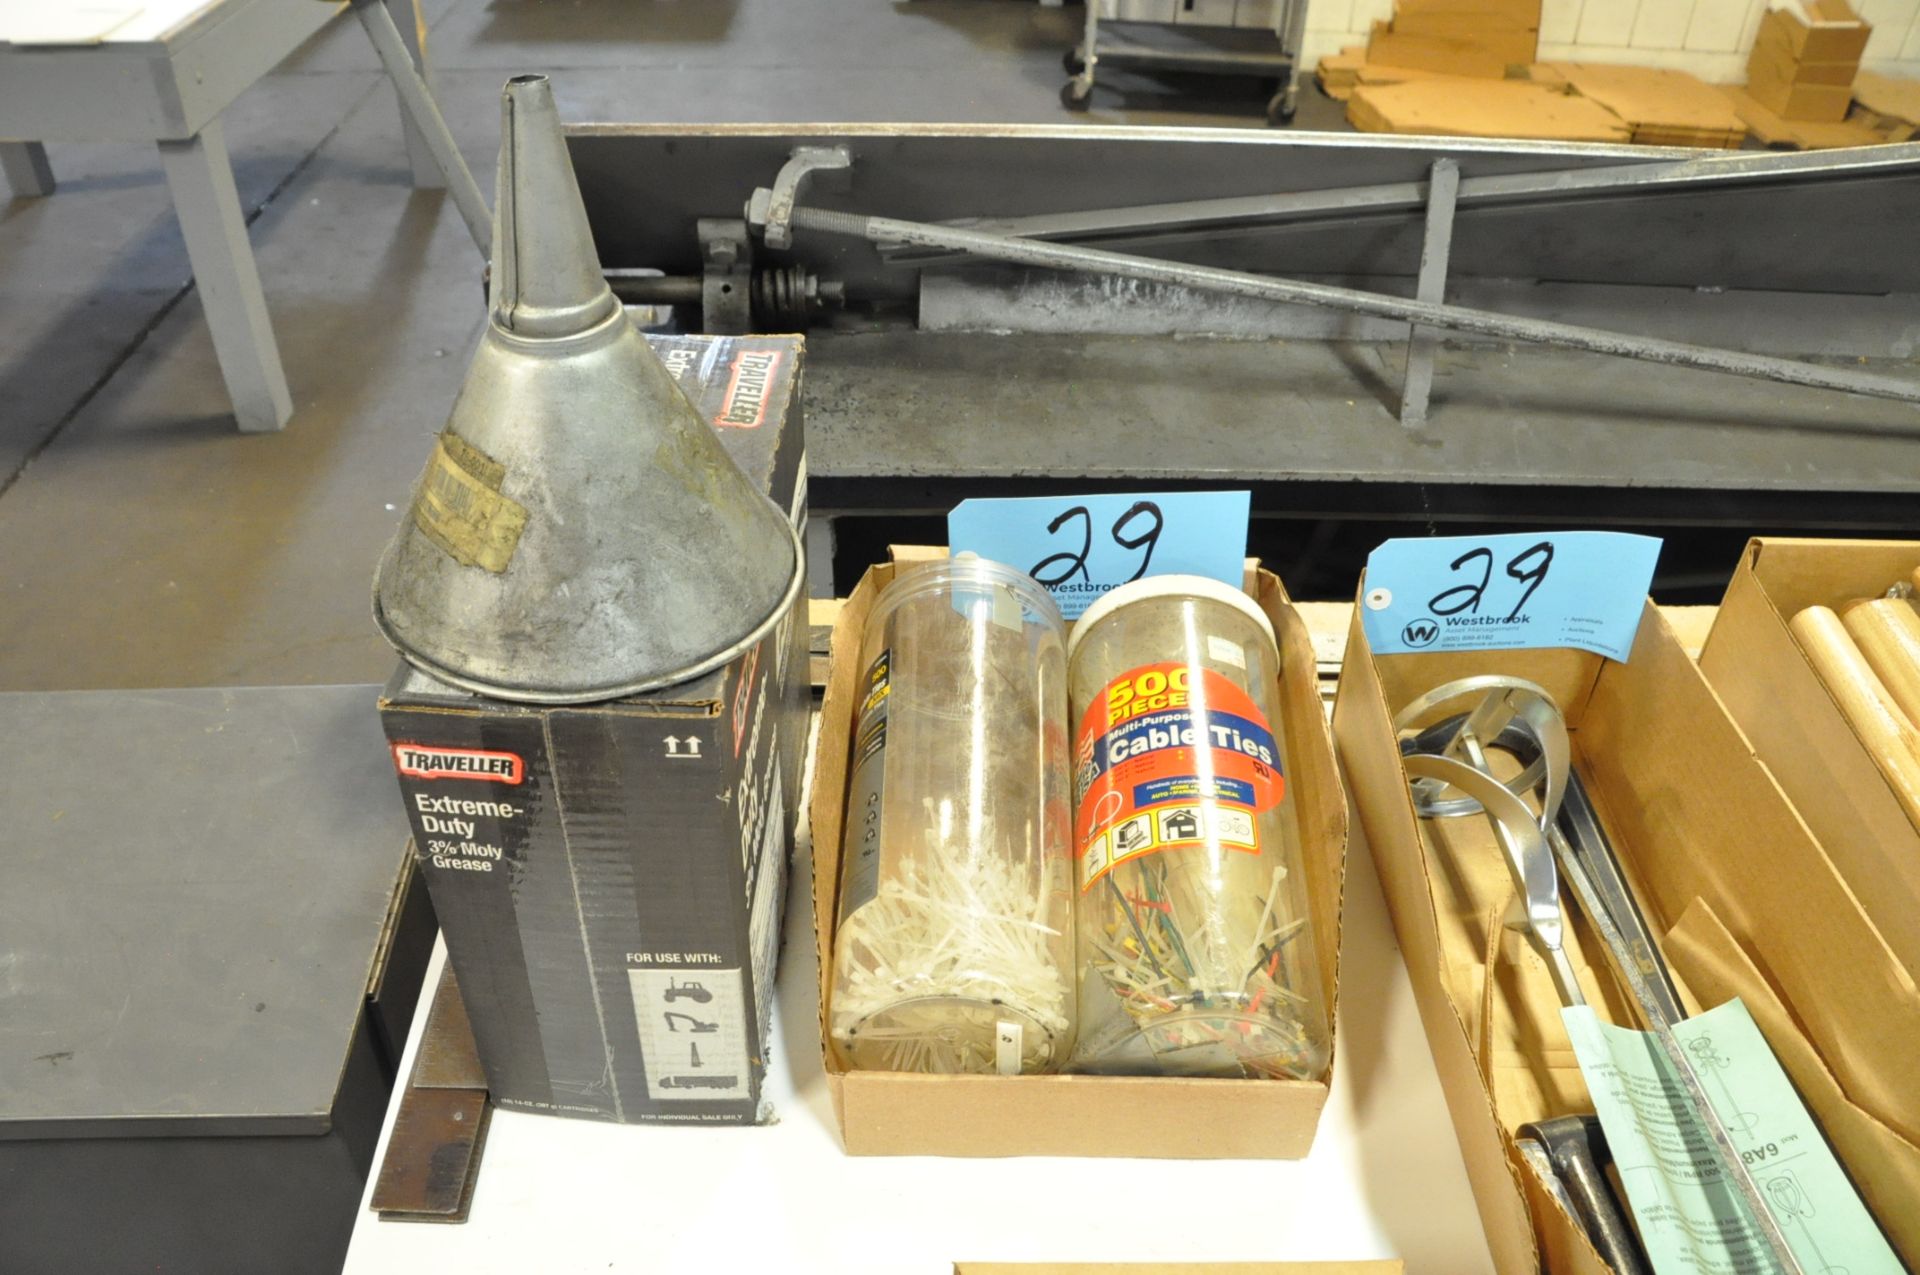 Lot-Mallets, Paint Mixer Attachments, Screwdrivers, Magnet, Cable Ties, etc. in (9) Boxes - Image 7 of 7